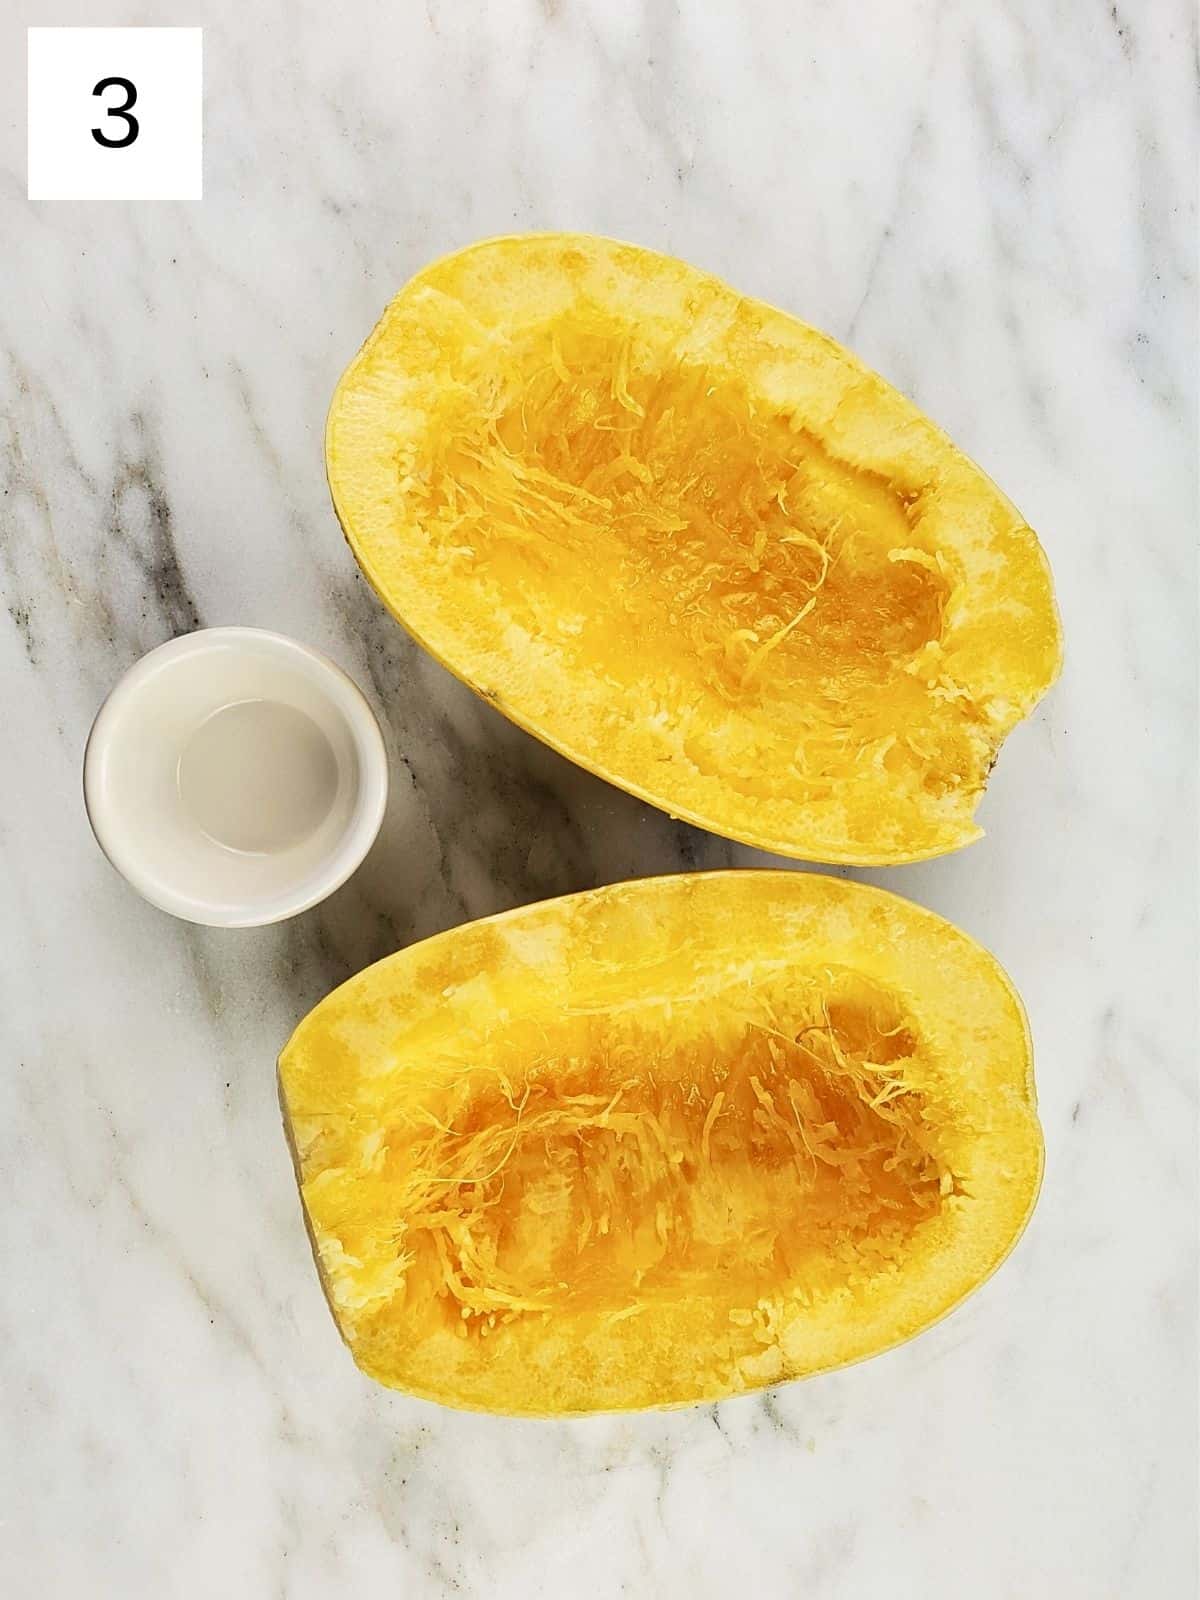 spaghetti squash with seeds removed, lightly coated in oil.